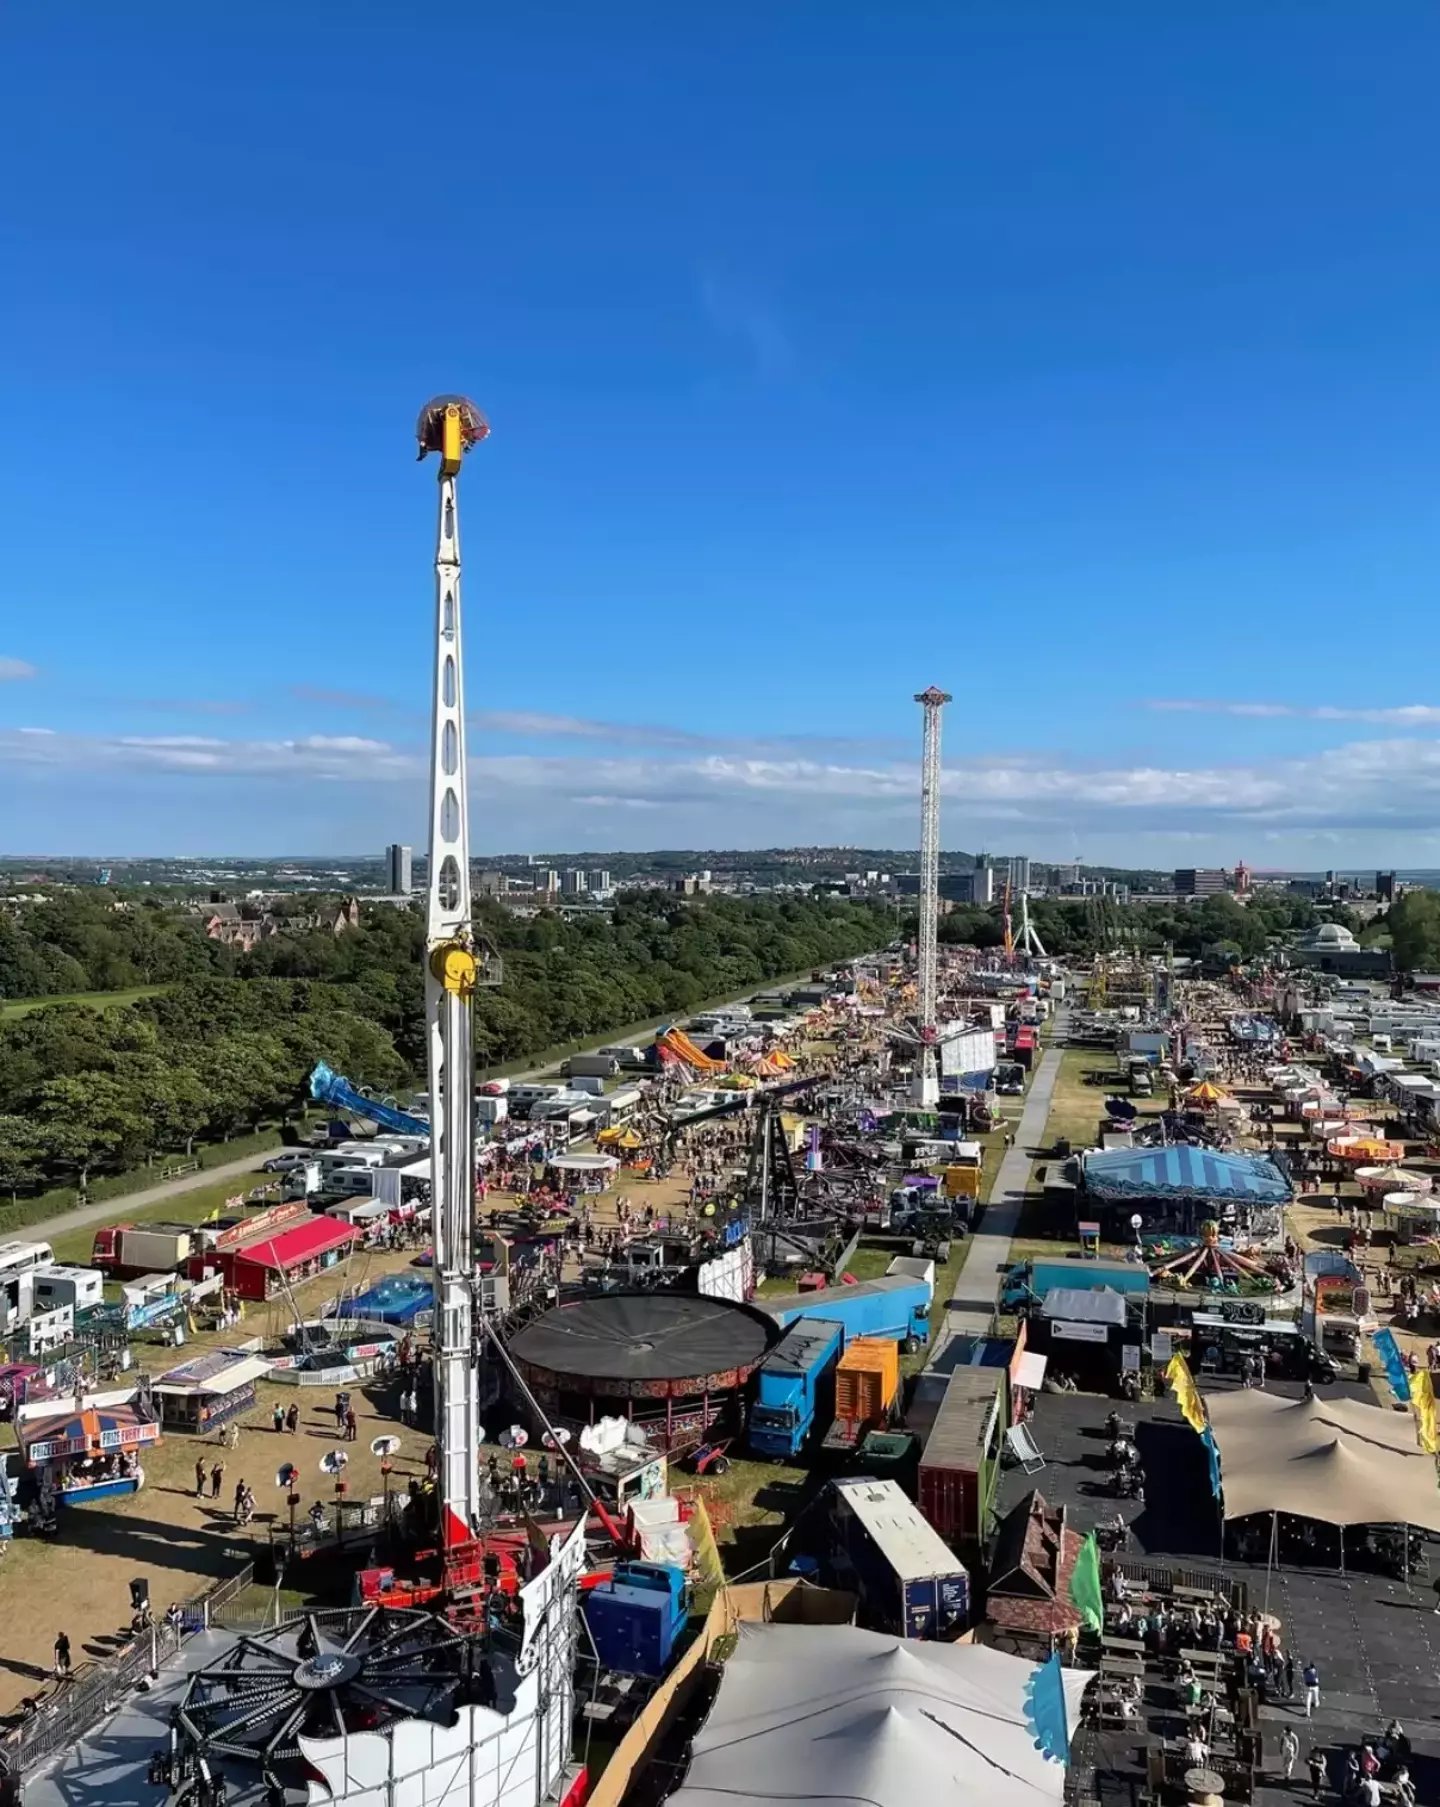 The Hoppings is located in Newcastle-upon-Tyne.